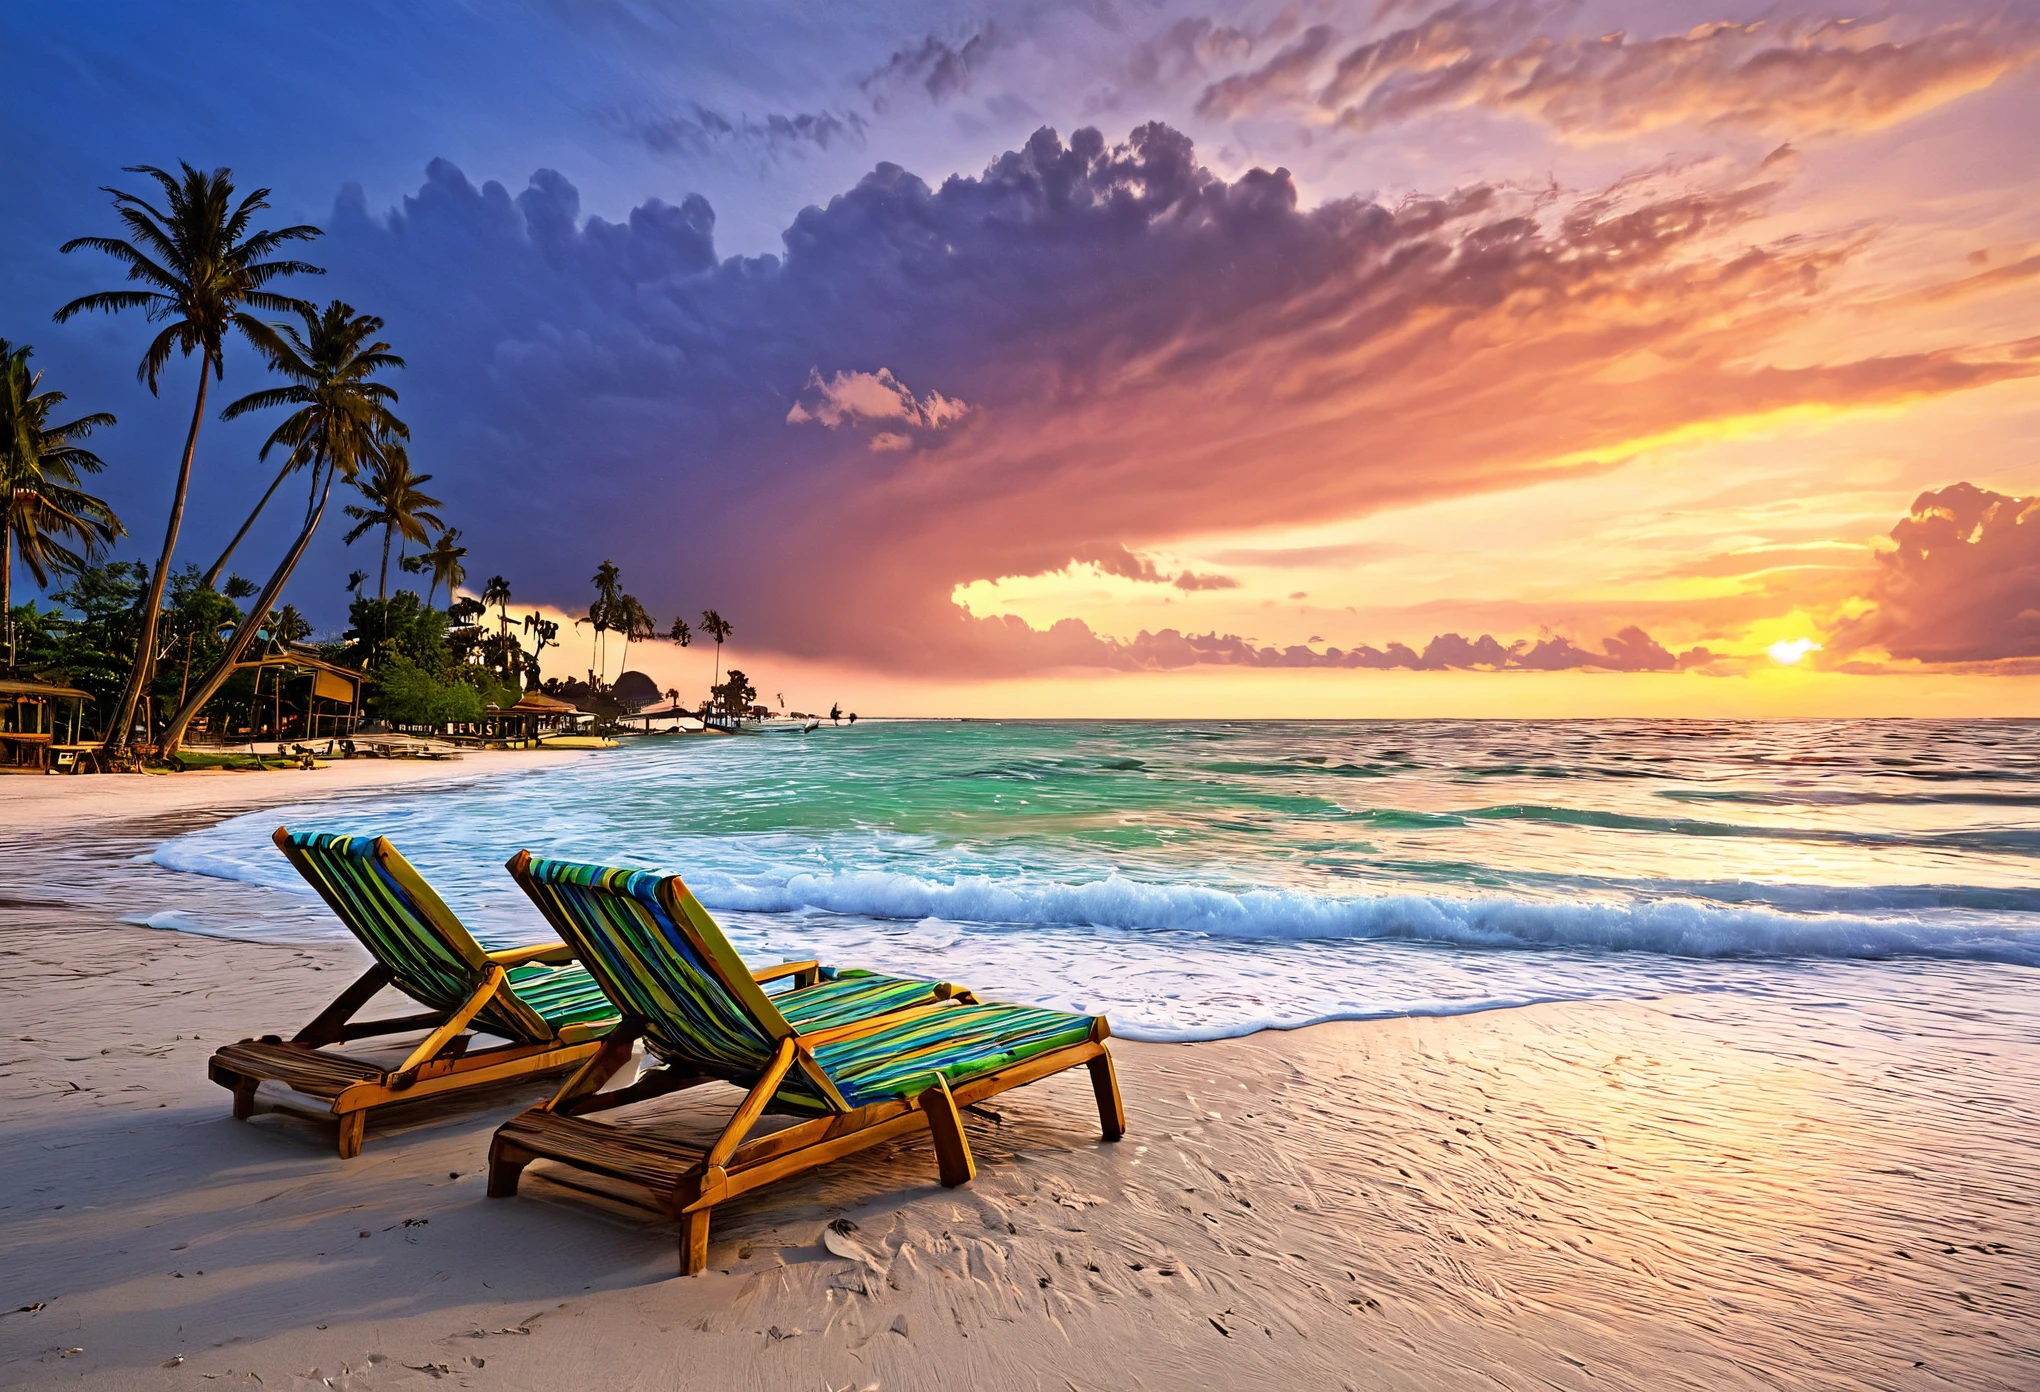 National Geographic photographer:1.4, beaches of Indonesia, landscape of a paradisiacal beach, palm trees, white sand, seagulls, beach chairs, beautiful waves breaking on the beach, colors of a sunset with some clouds, sun falls illuminating the waters photograph taken by a professional photographer:1.5, representative of this beautiful tourist landscape, magical, masterpiece, photography awarded for its beauty, vivid and harmonious colors, cinematic lighting, 32k